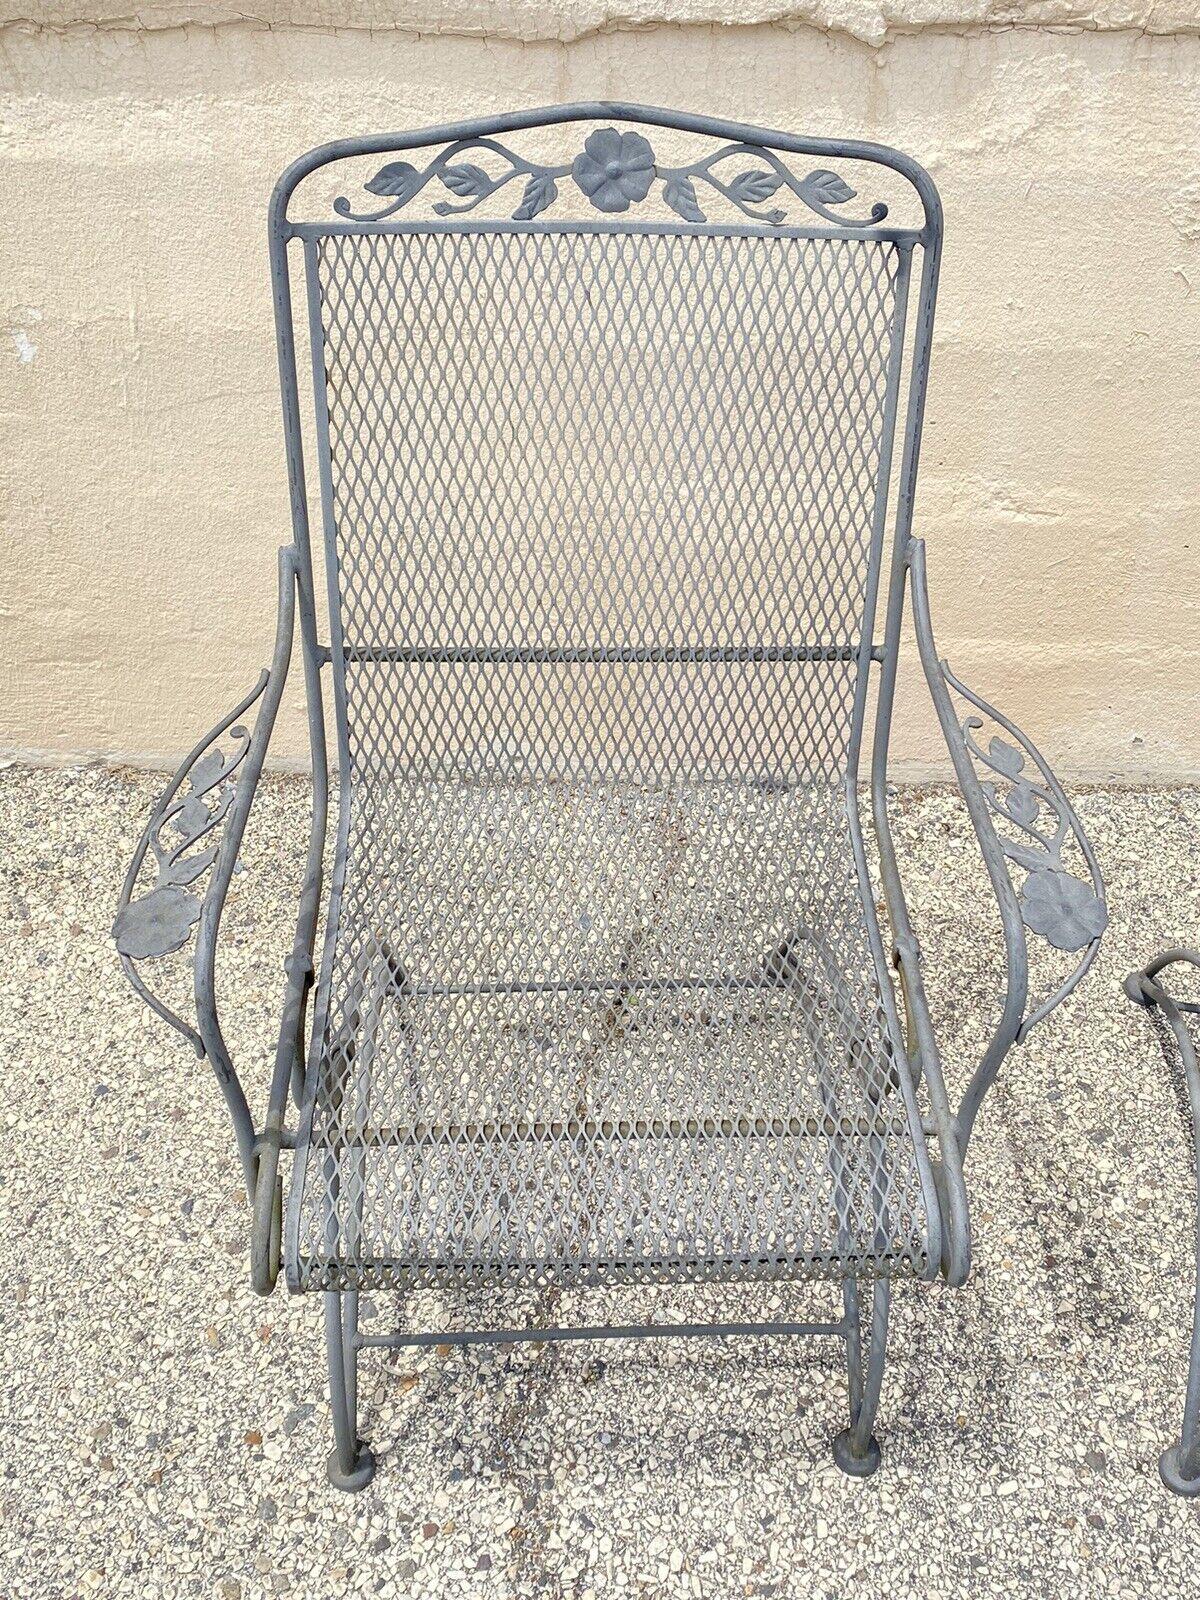 Victorian Vintage Meadowcraft Dogwood Coil Spring Wrought Iron Garden Patio Chair, a Pair